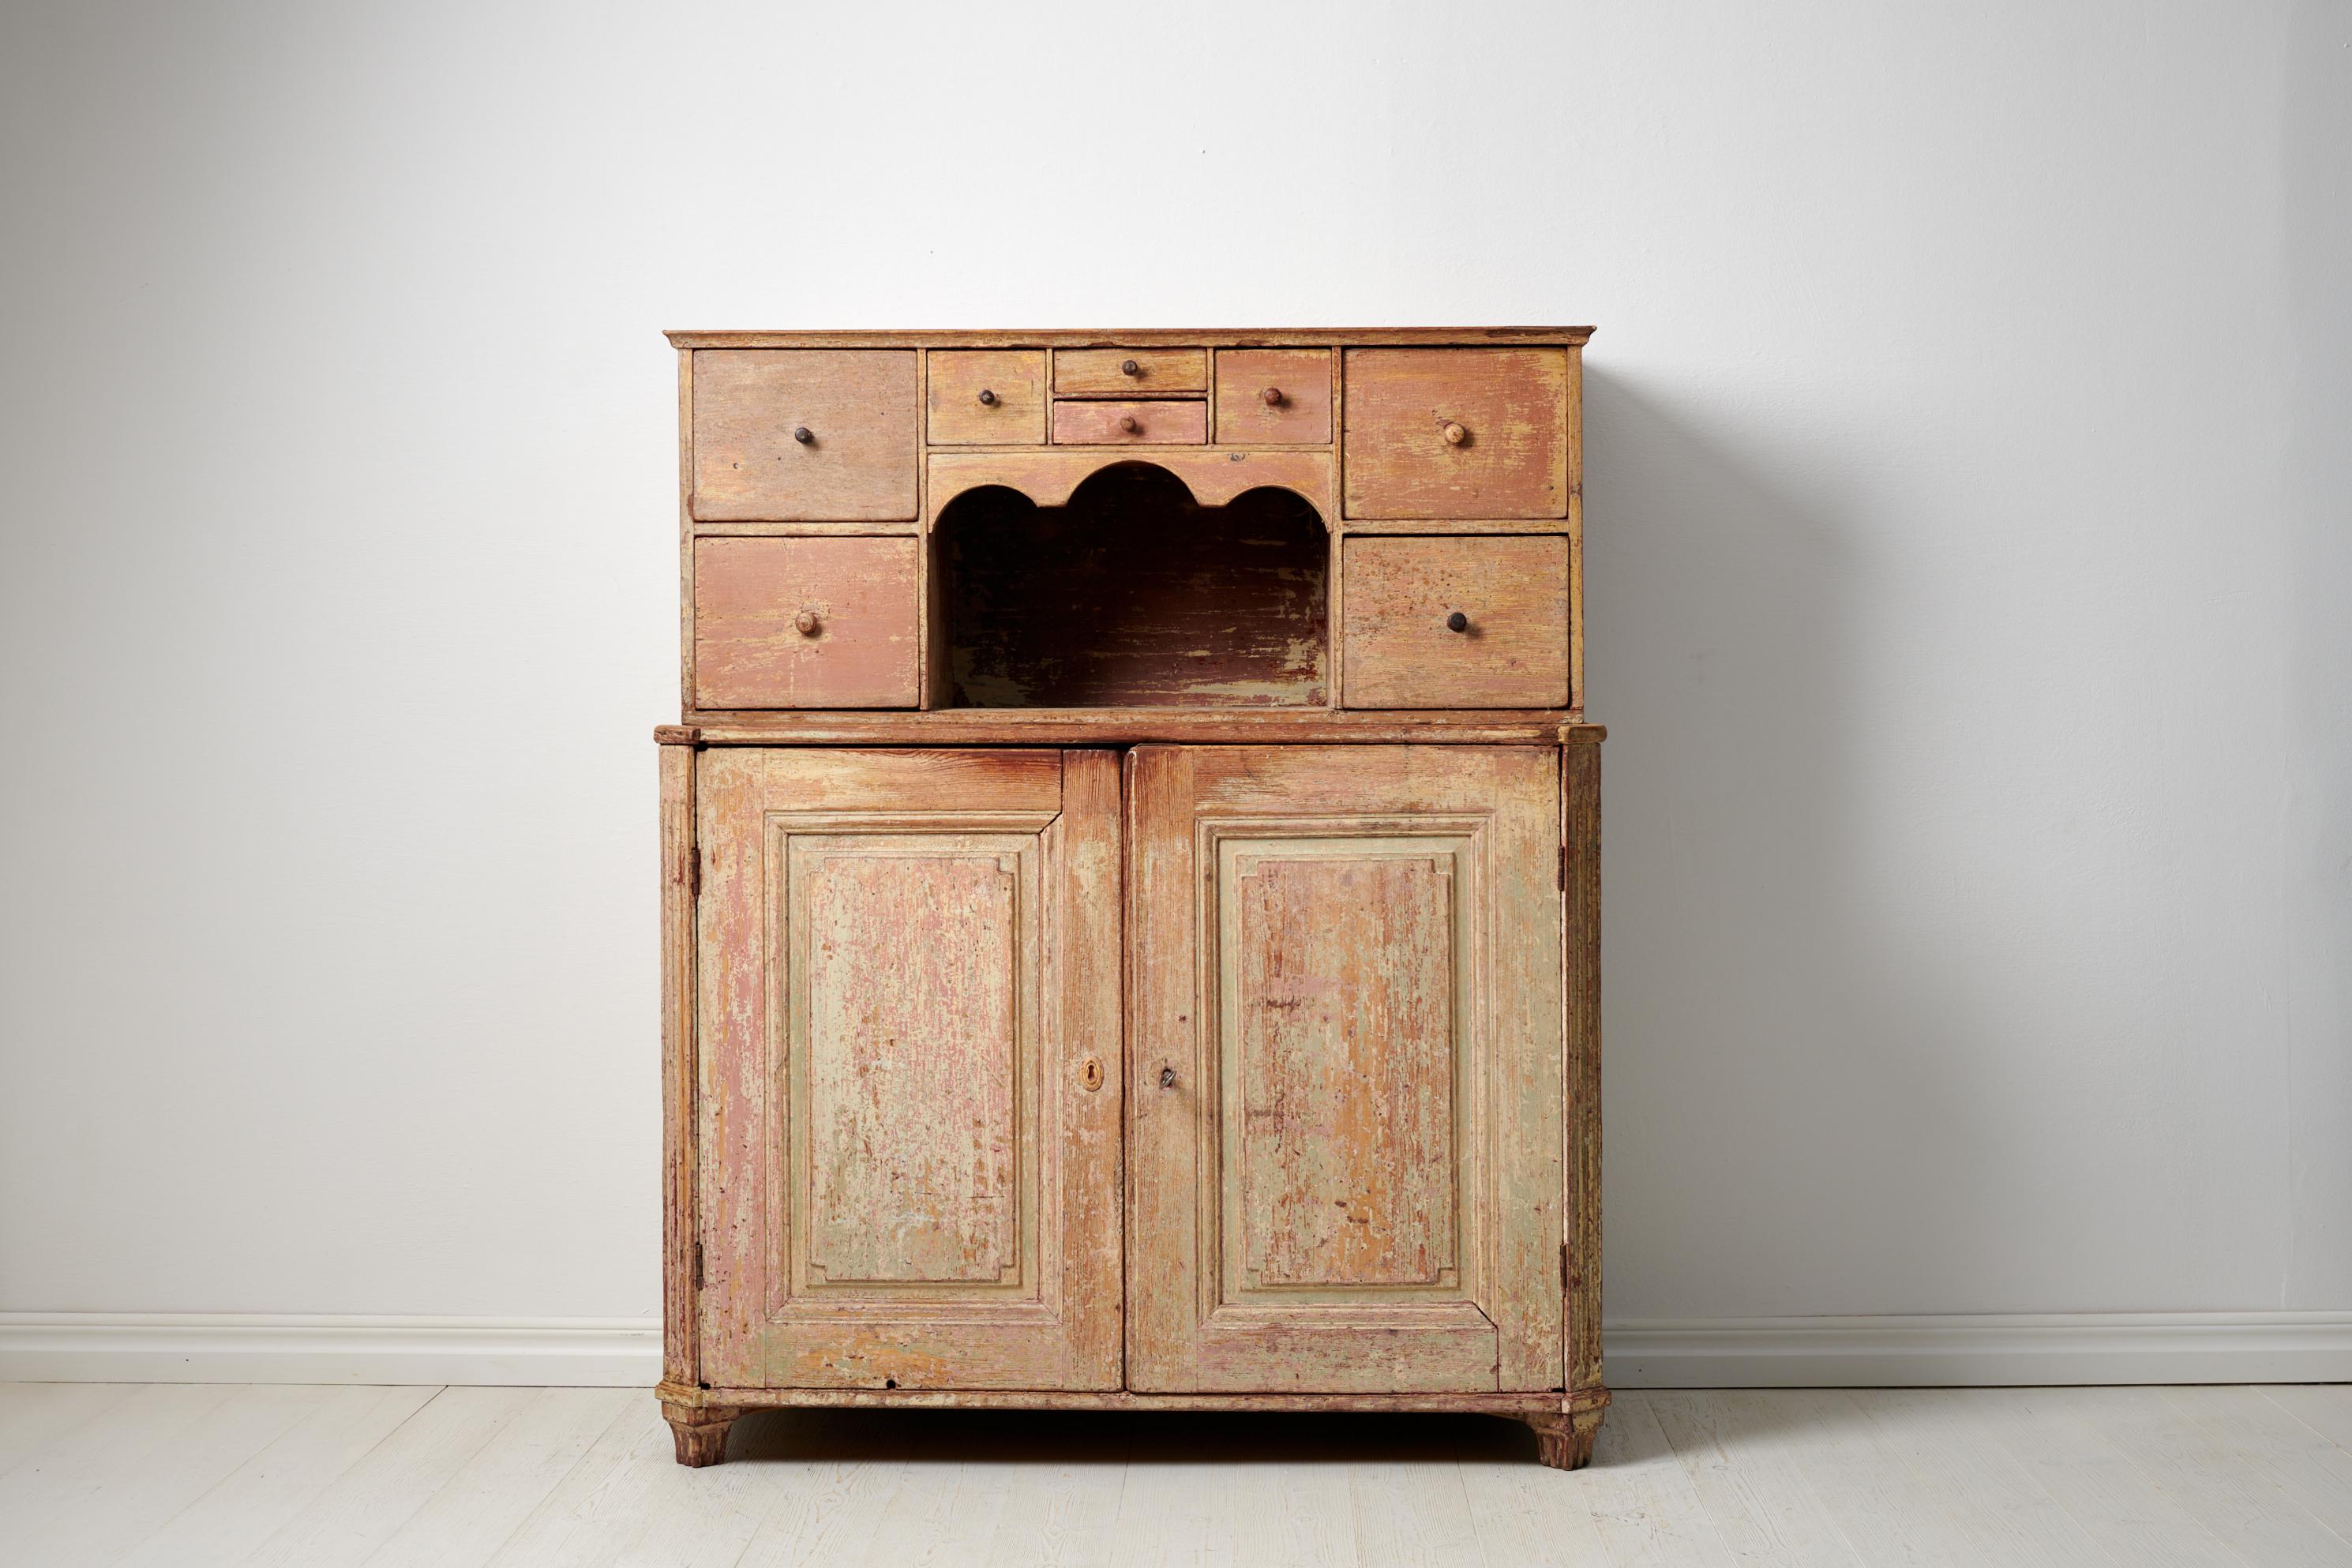 Genuine Swedish gustavian sideboard from northern Sweden. Th sideboard is a genuine country house furniture made around 1790. The frame is solid pine and the interior has two drawers as well as shelves. More unusual is the top section with drawers